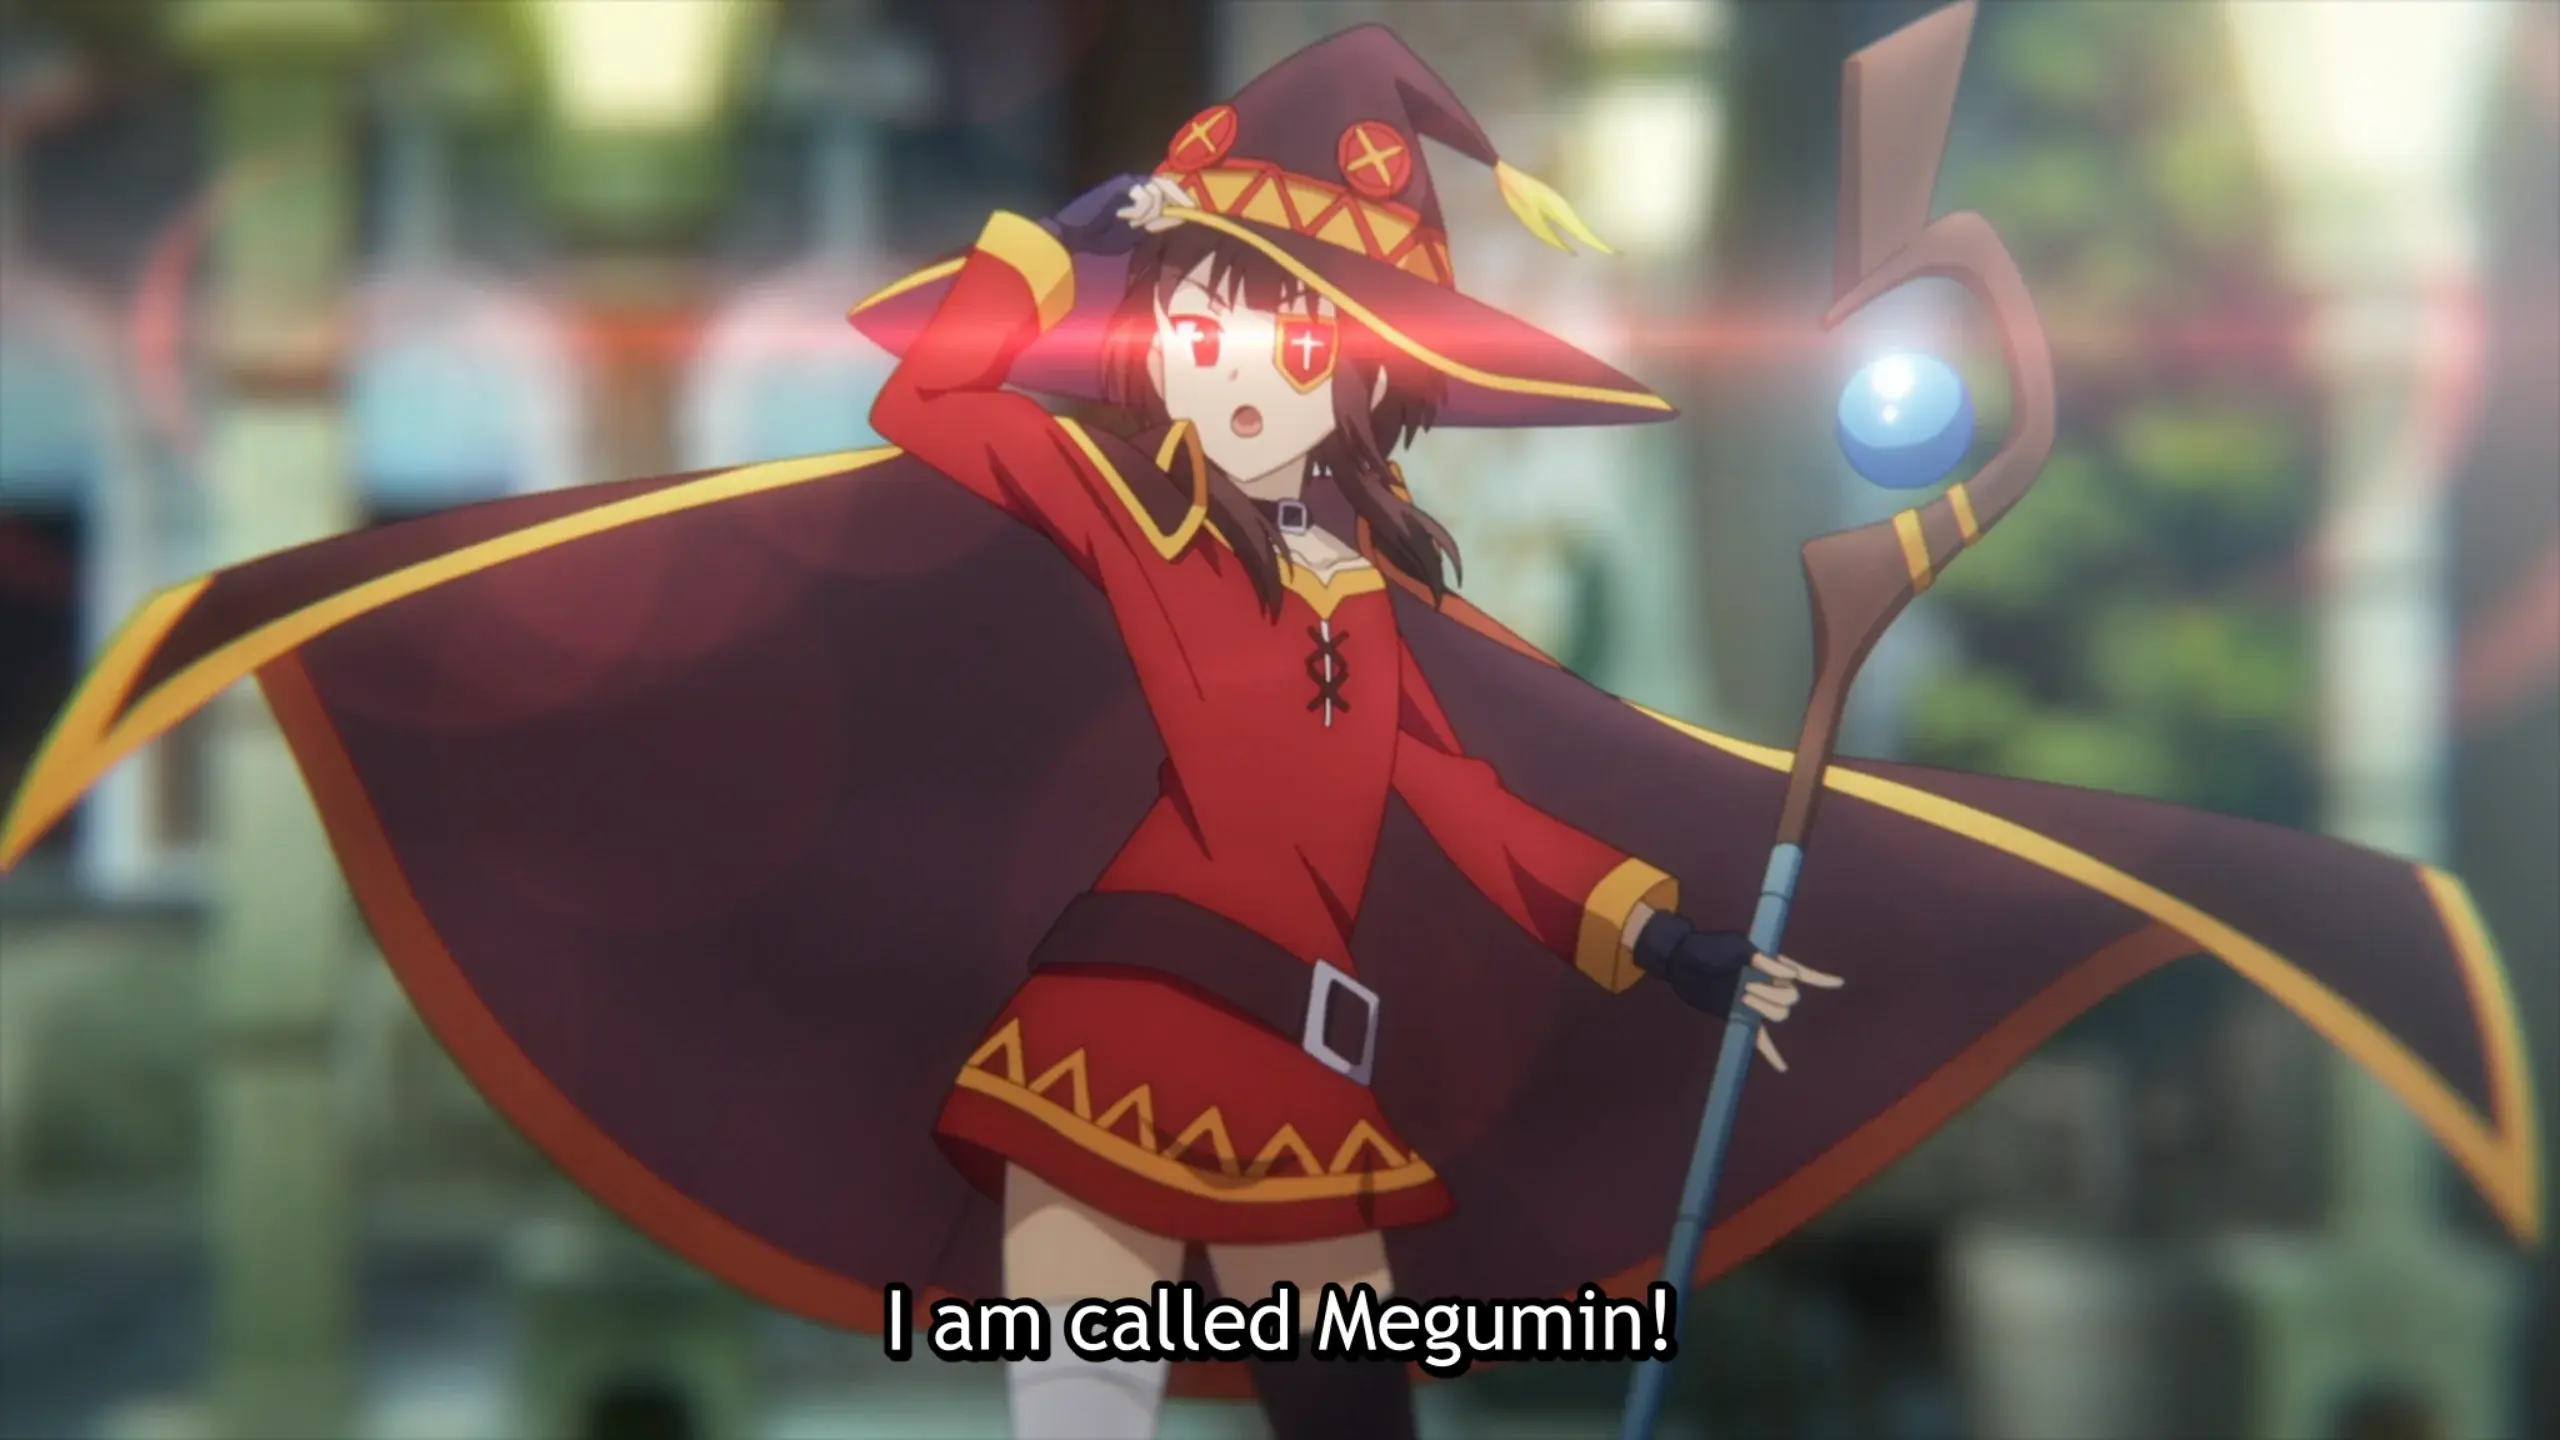 Image of Megumin throwing her cape and calling her name in most edgelordy way